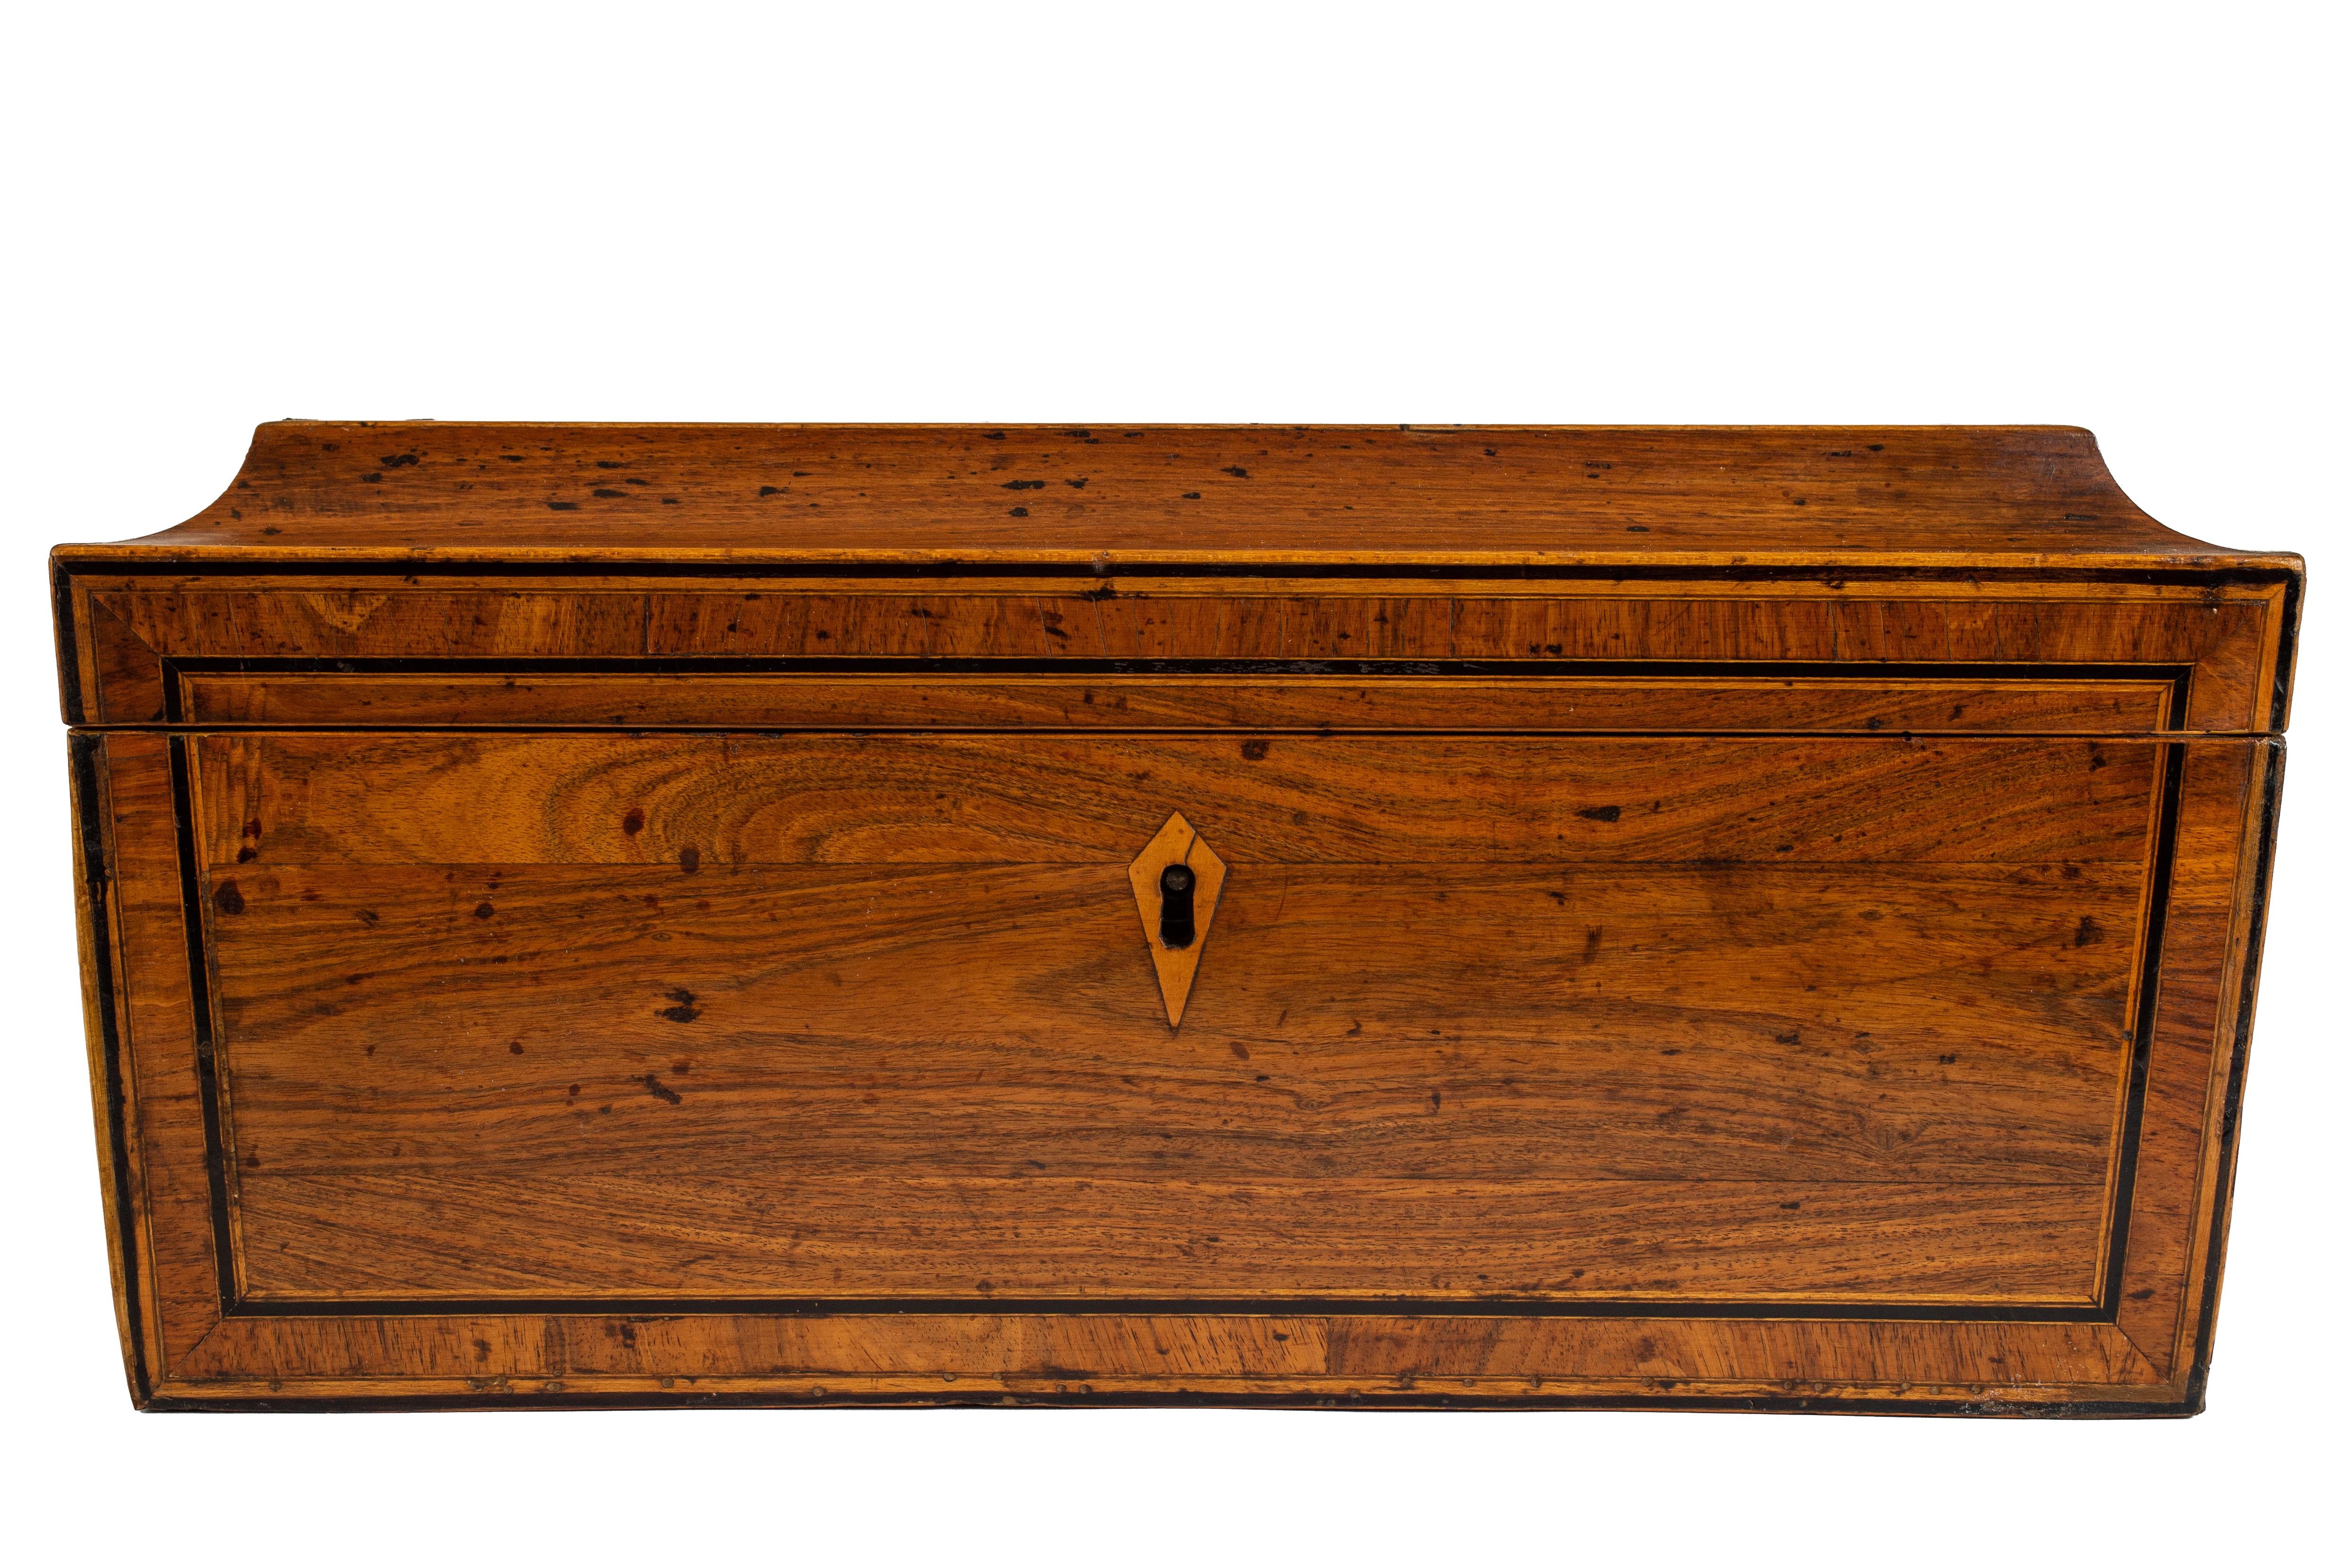 19th Century Regency Rosewood and Tulipwood Jewelry Box For Sale